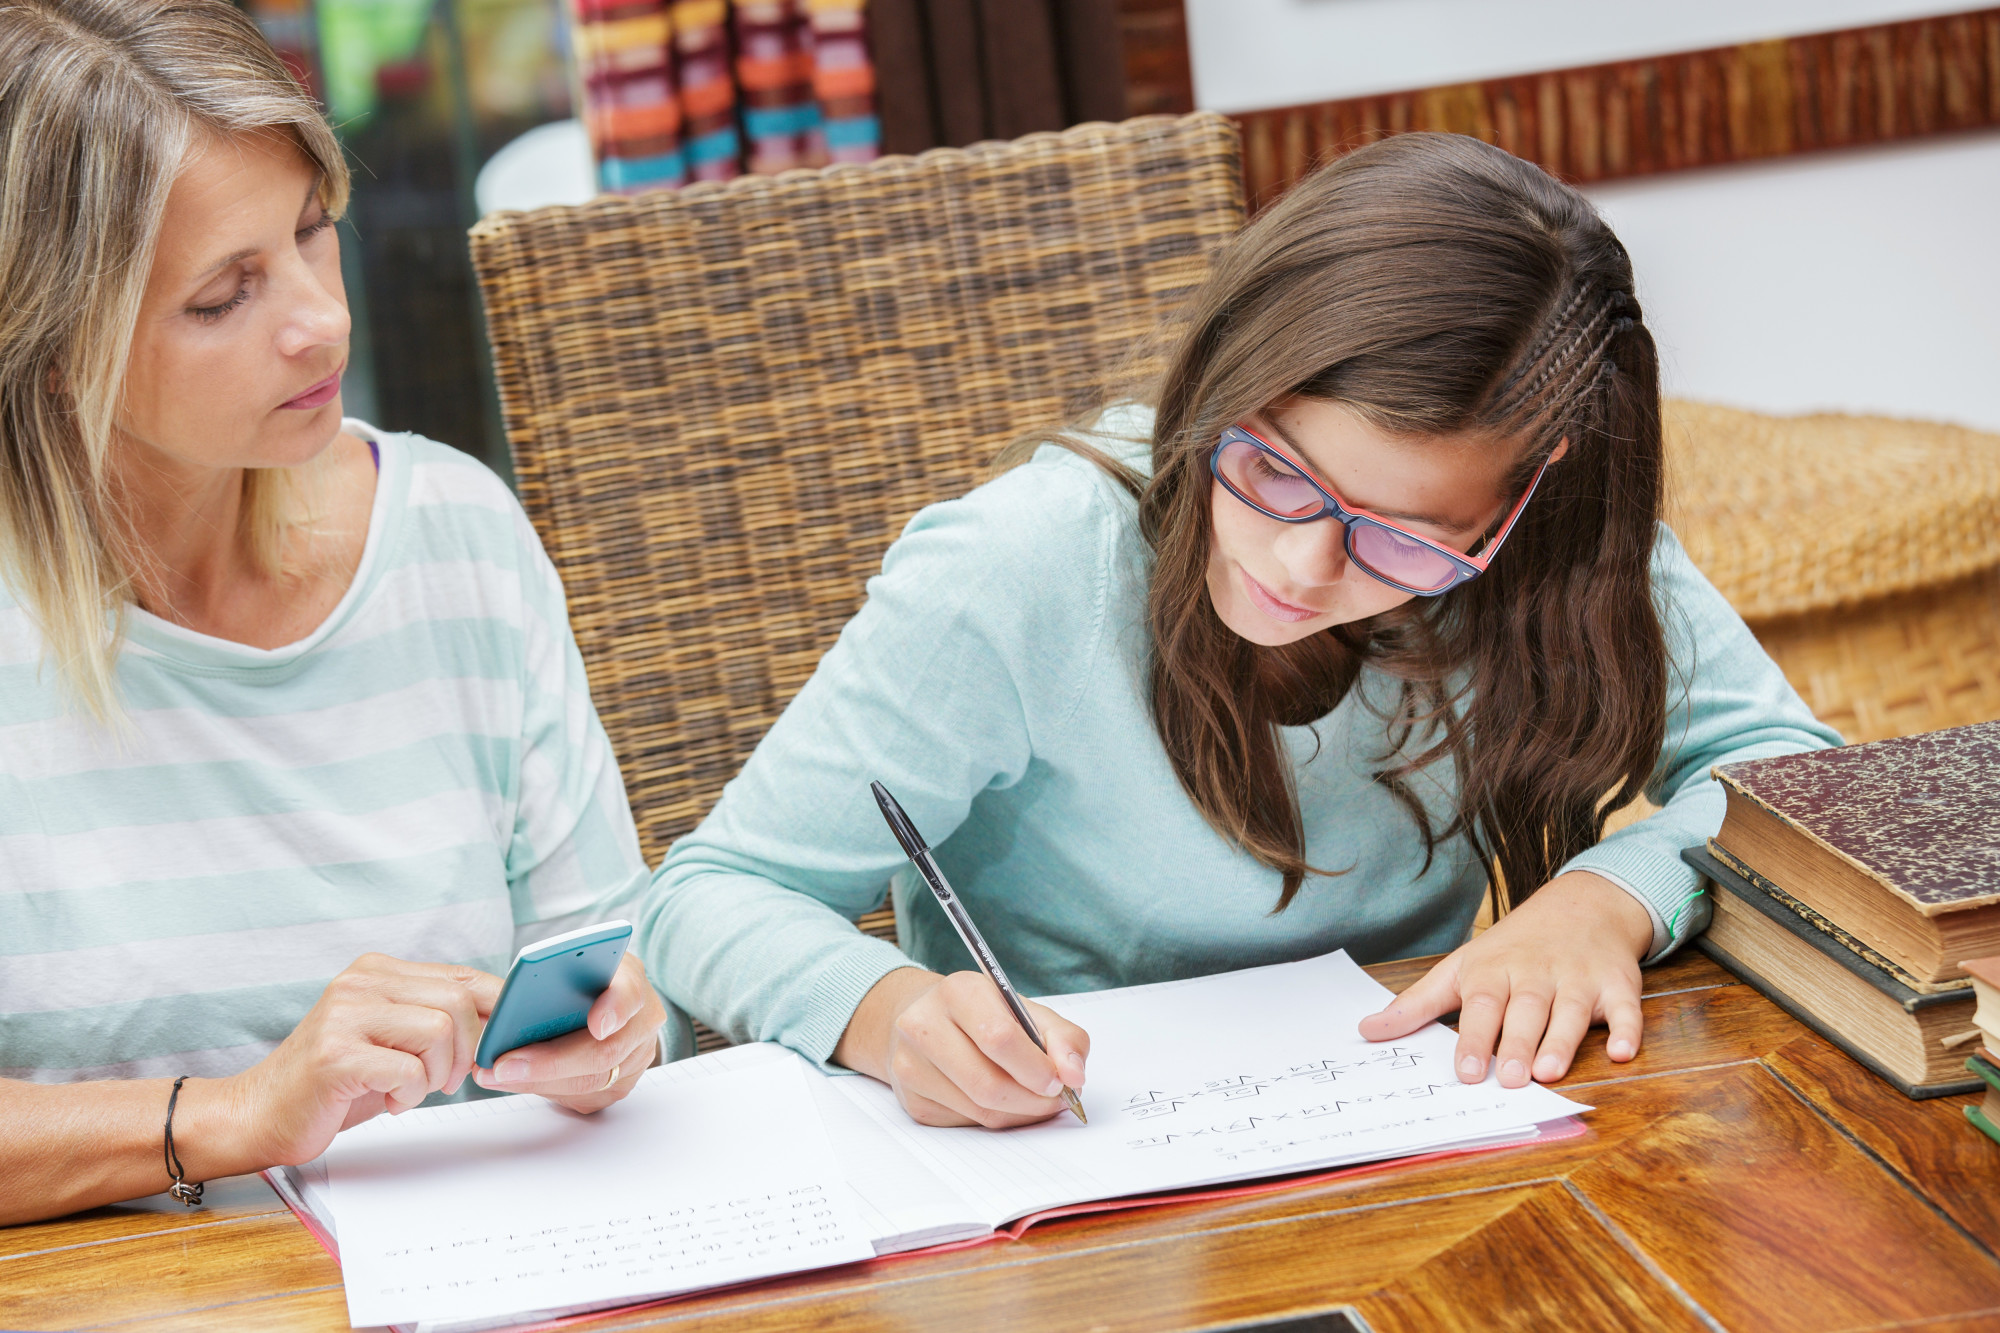 Does Your Child Need a Math Tutor? 3 Signs They Might